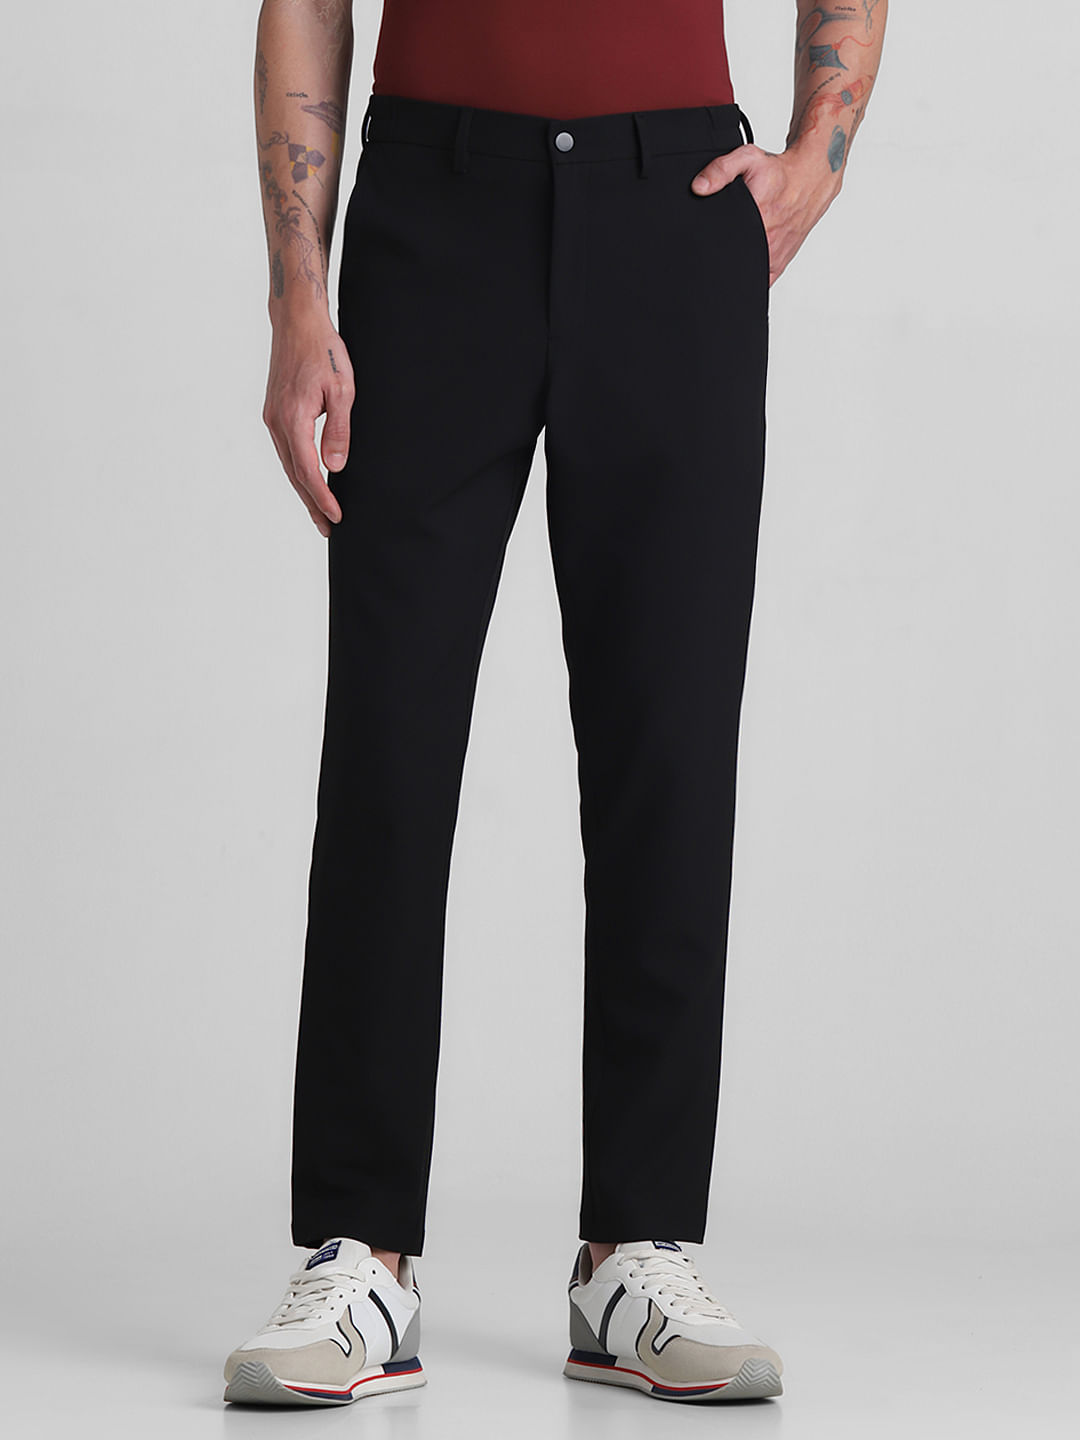 REGULAR FIT TROUSERS IN COTTON BLEND FABRIC | Antony Morato